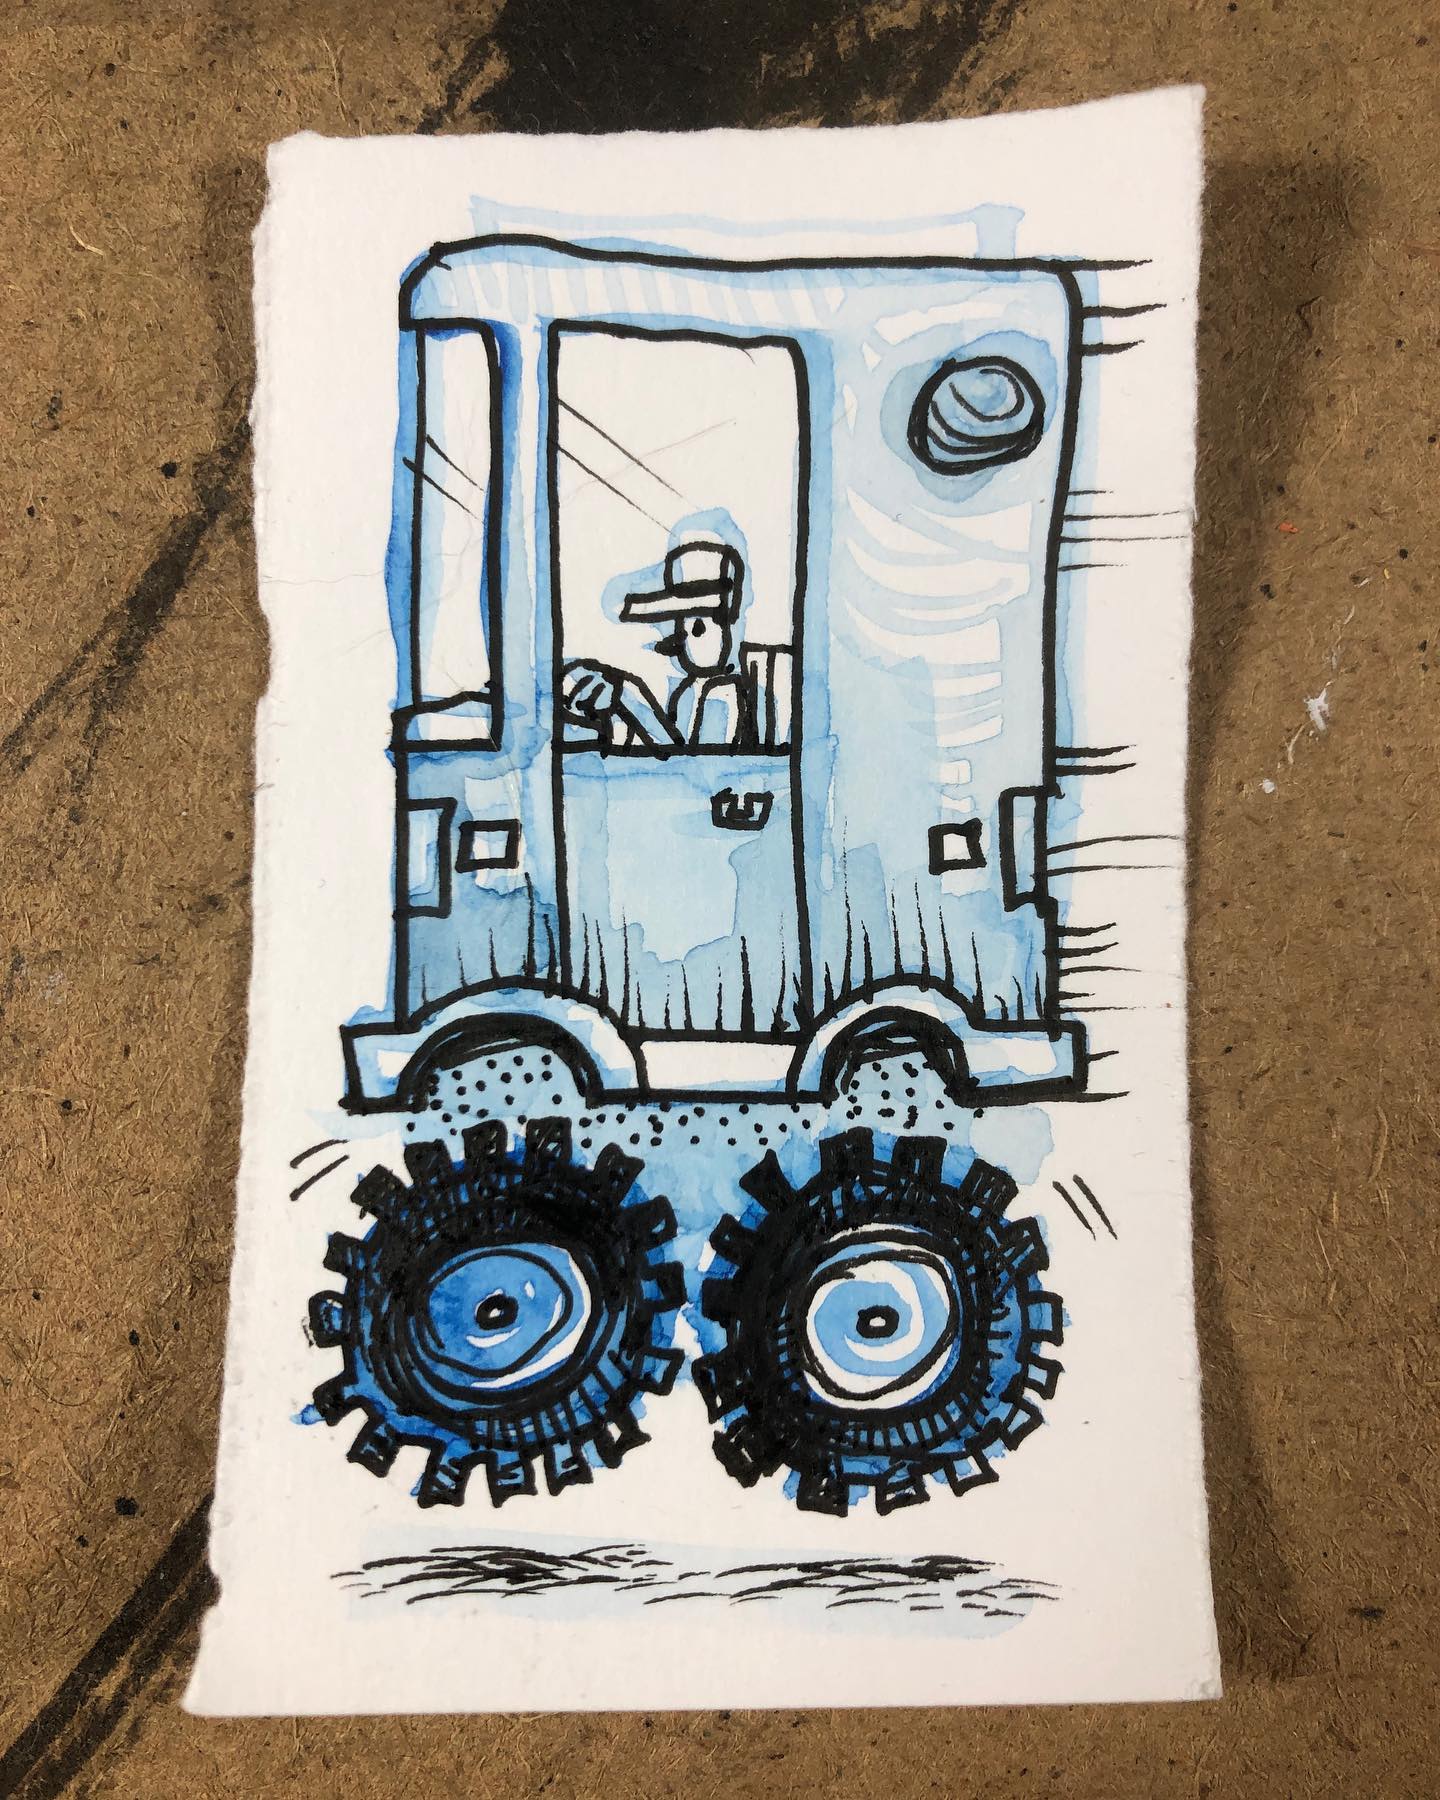 Ink and watercolor drawing of a very tall van with off-road wheels speeding above the ground